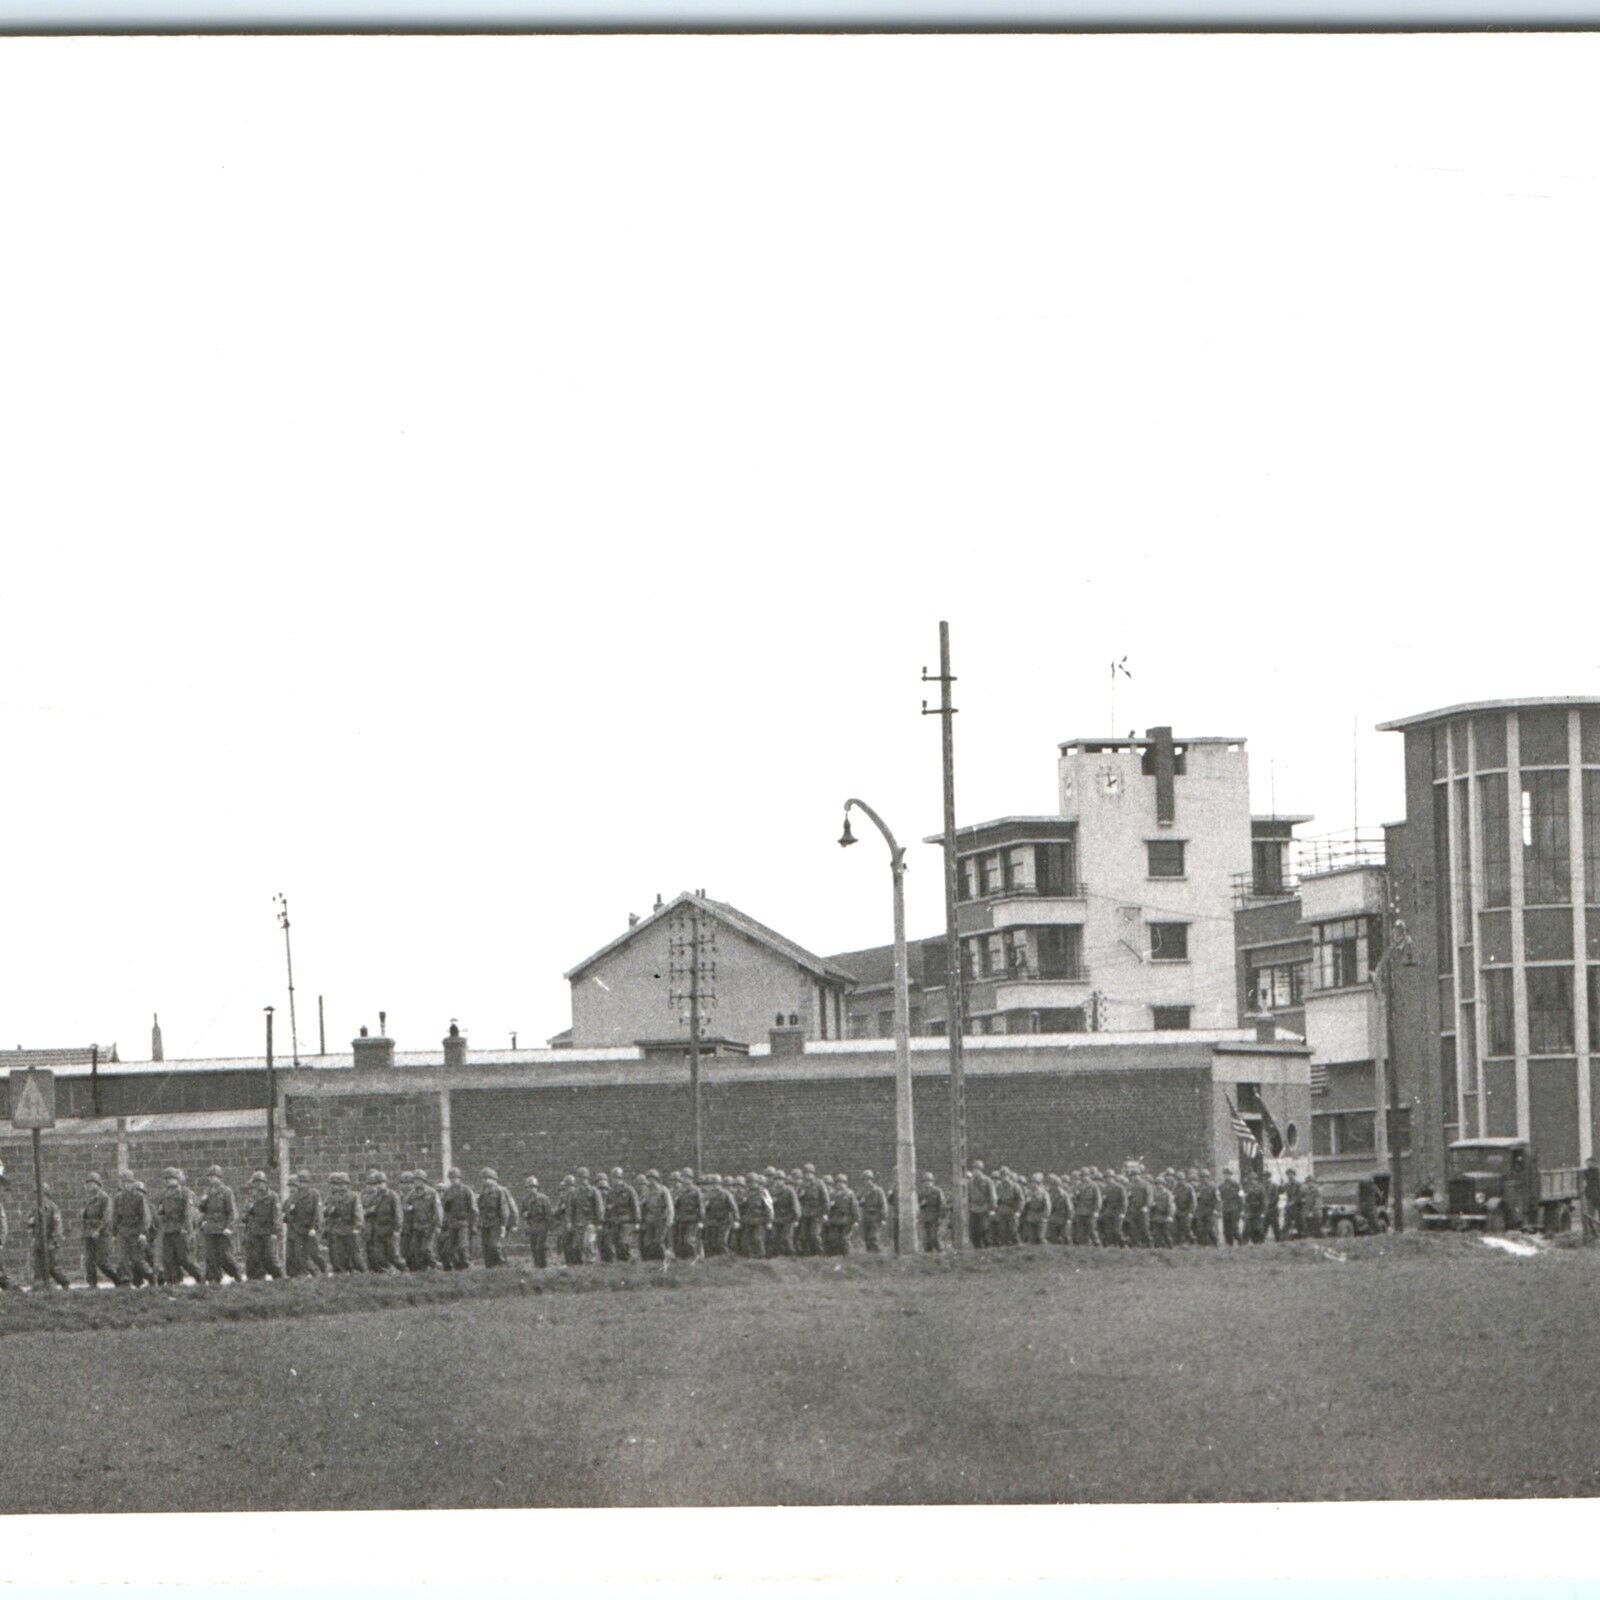 c1940s USMC Marines March Real Photo Snapshot Soldier HQ Service WWII Army C47